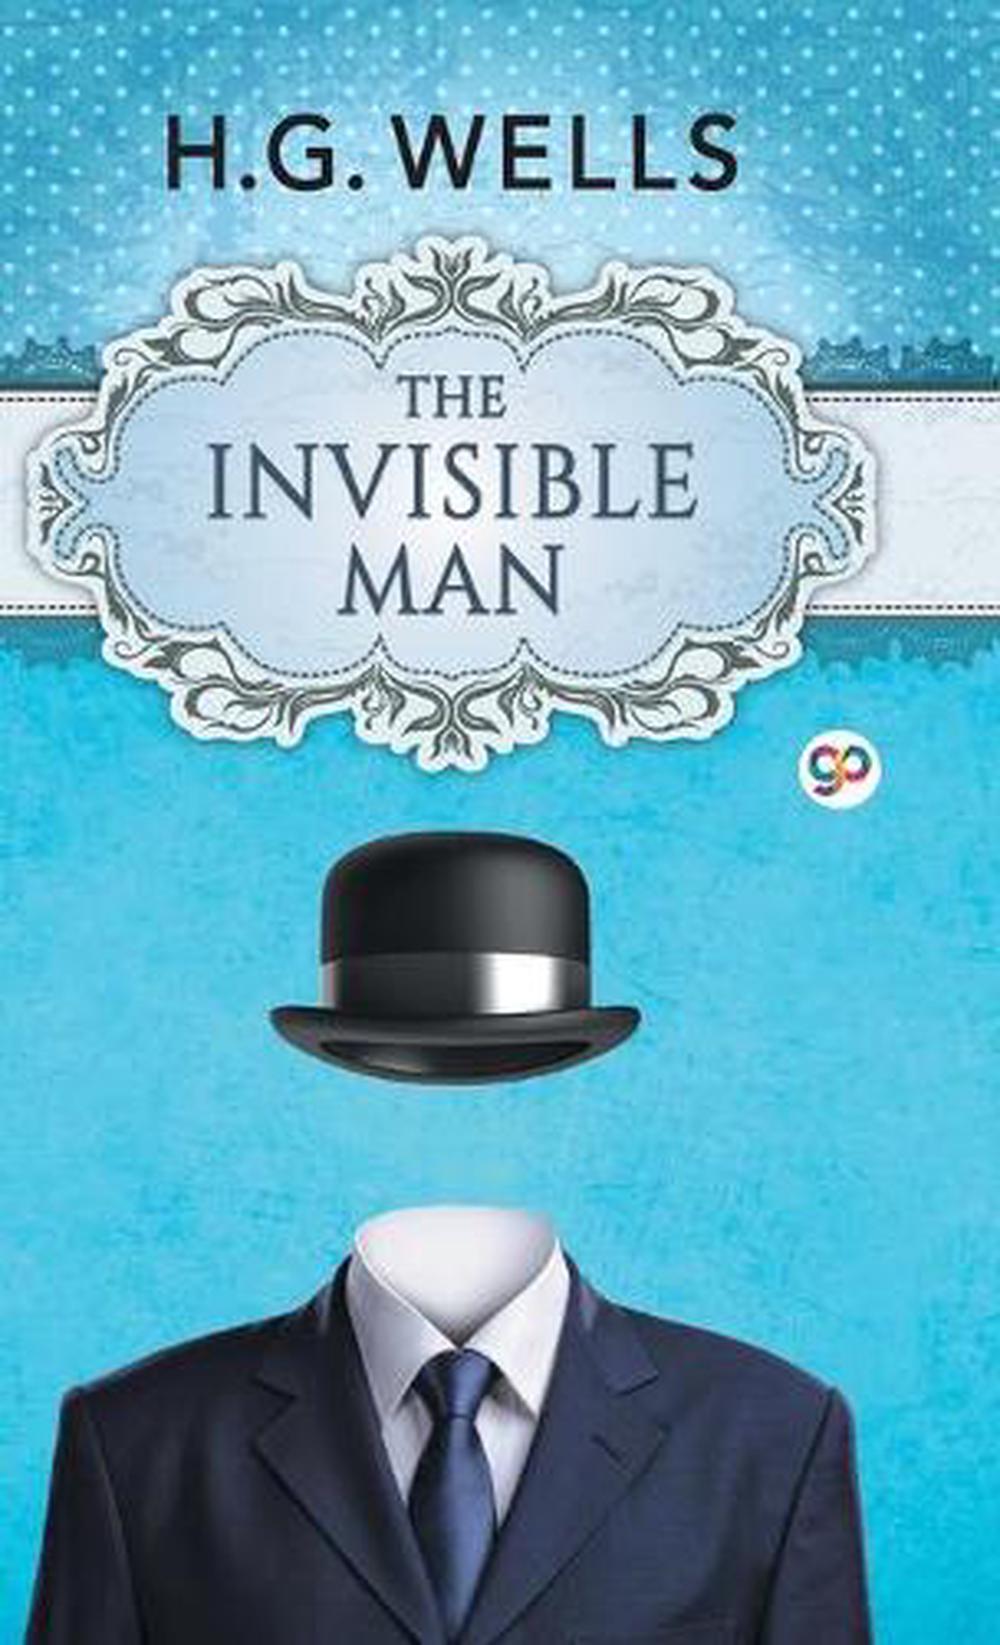 The Invisible Man eBook by H.G. Wells | Official Publisher 